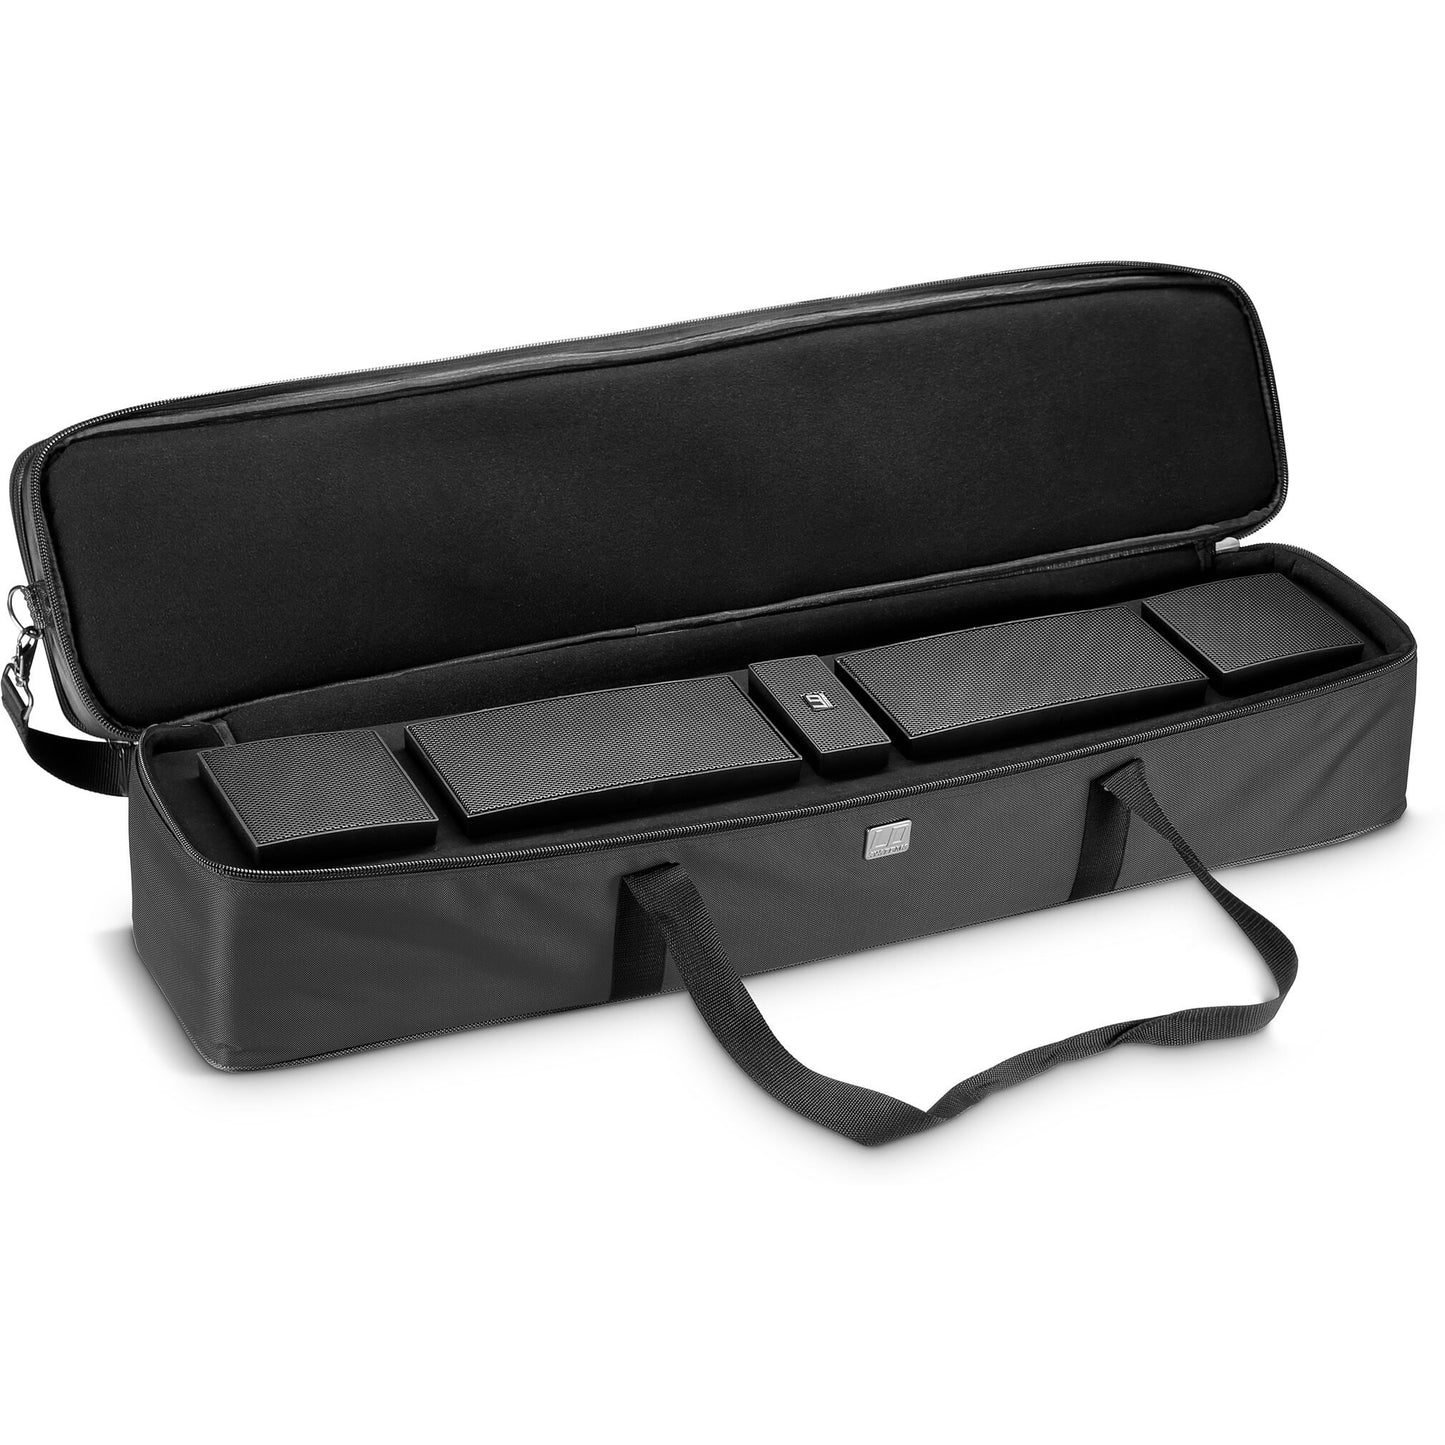 LD Systems Padded Carry Bag for CURV 500 TS